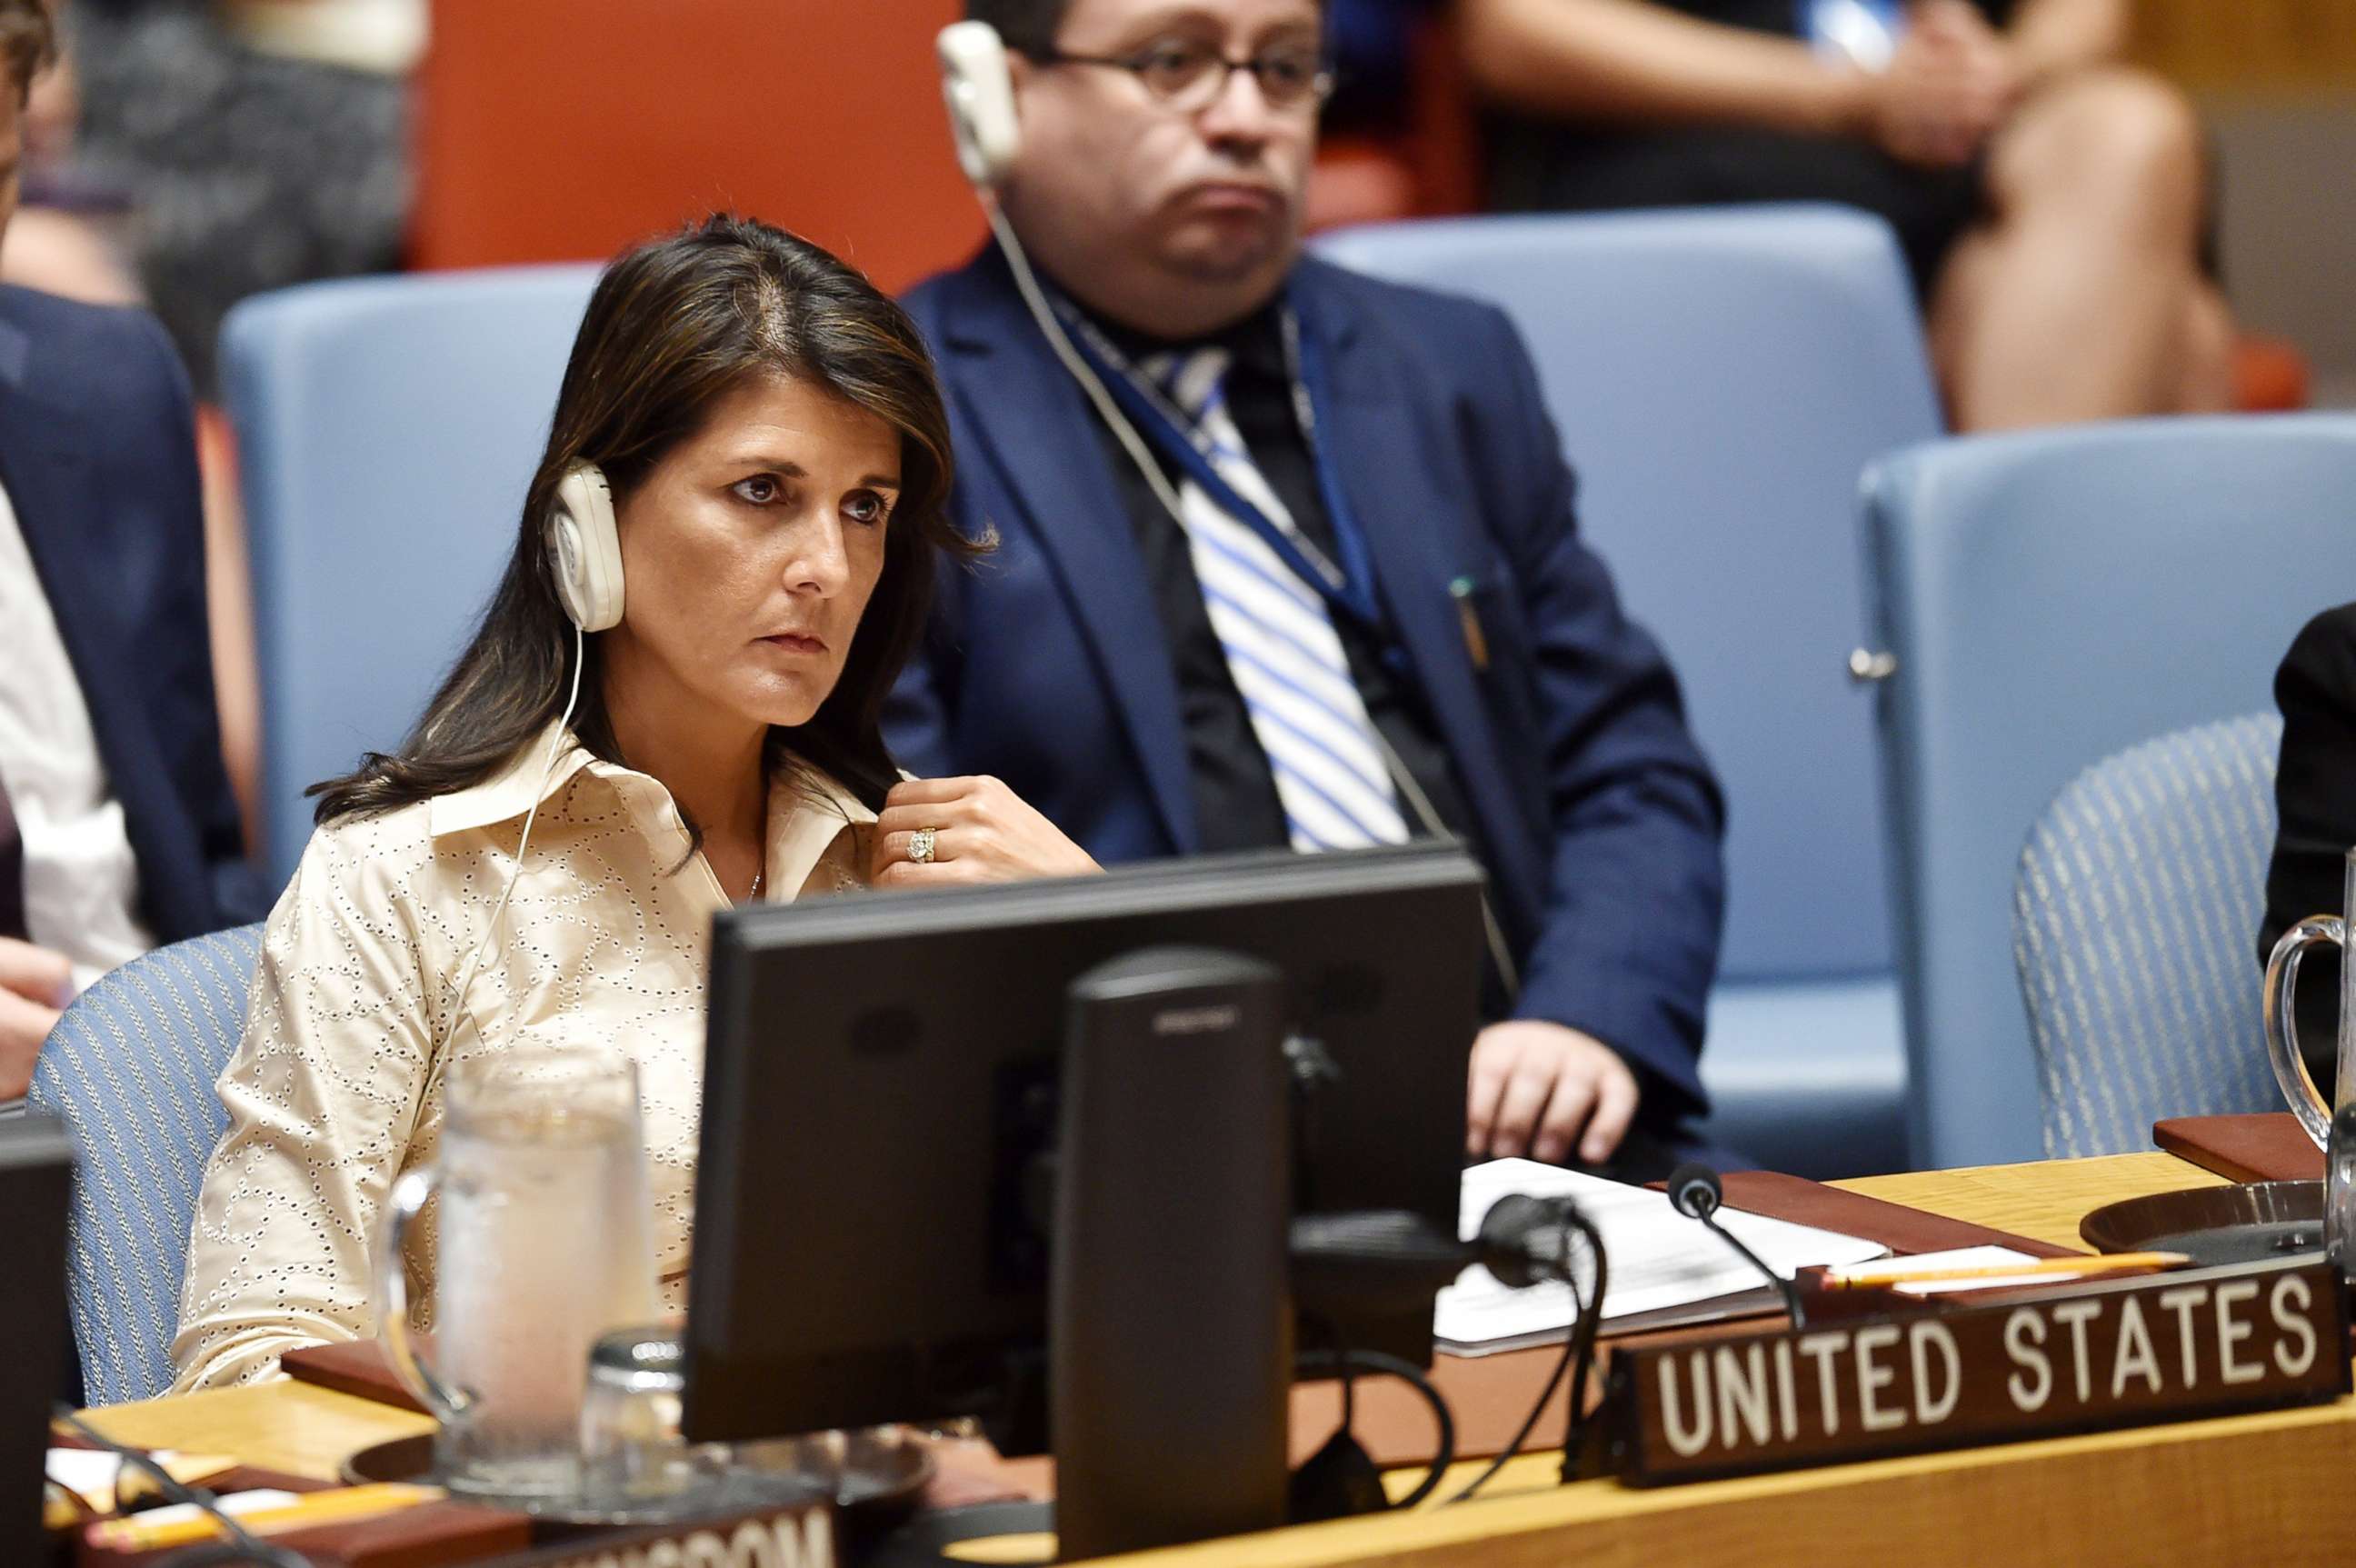 PHOTO: U.S. Ambassador to the United Nations, Nikki Haley attends a UN Security Council on May 15, 2018, at UN Headquarters in New York.